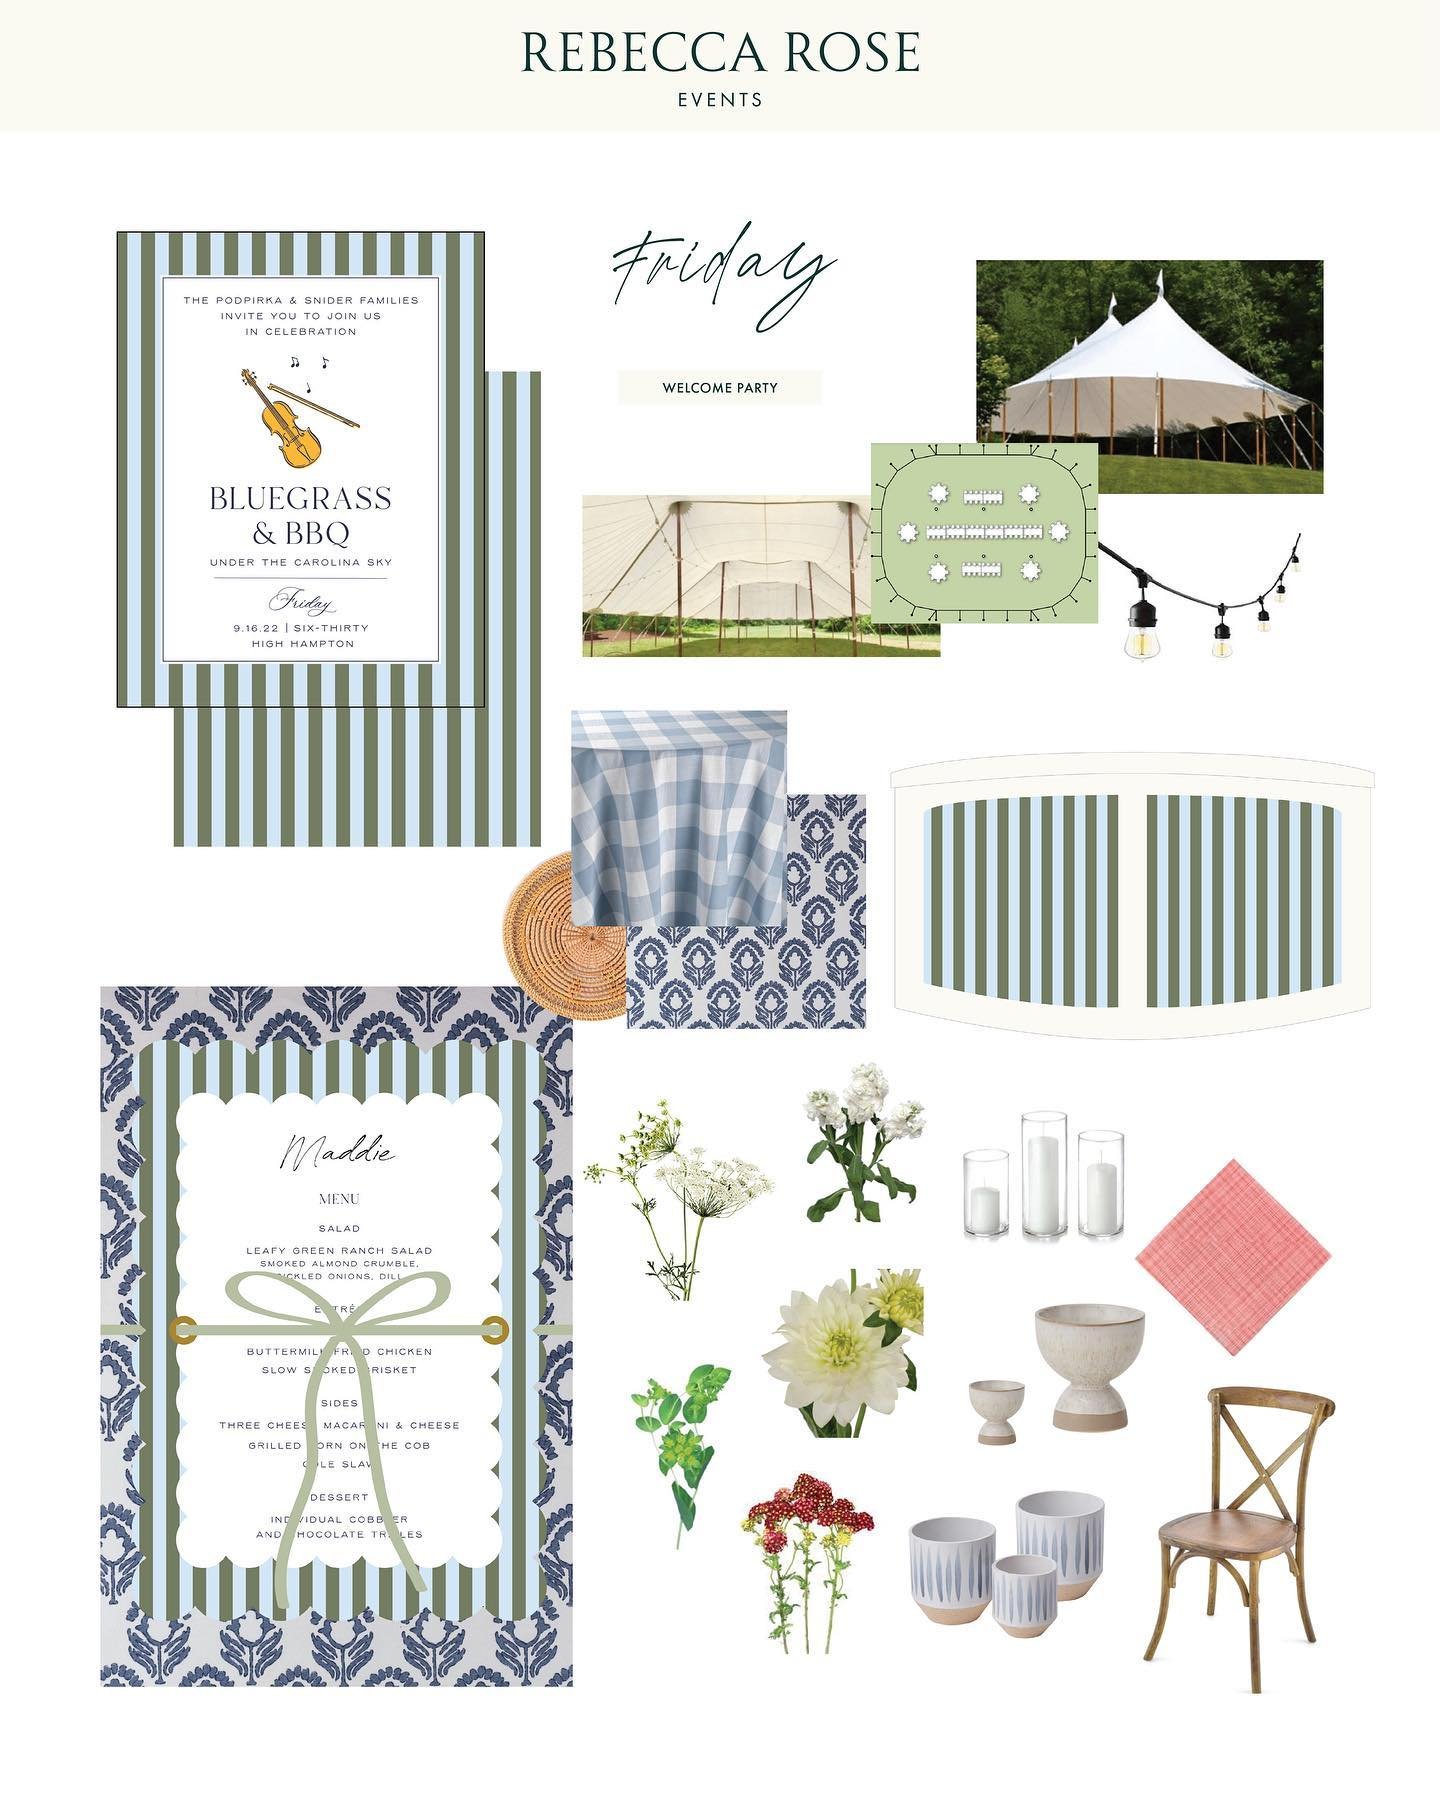 From the ideas sketched out on the design plan, to the breathtaking reality, we find so much joy in bringing our clients&rsquo; dreams to life. A welcome party themed as Bluegrass + BBQ under the Carolina Sky? Don&rsquo;t mind if we do. 

Planning &a